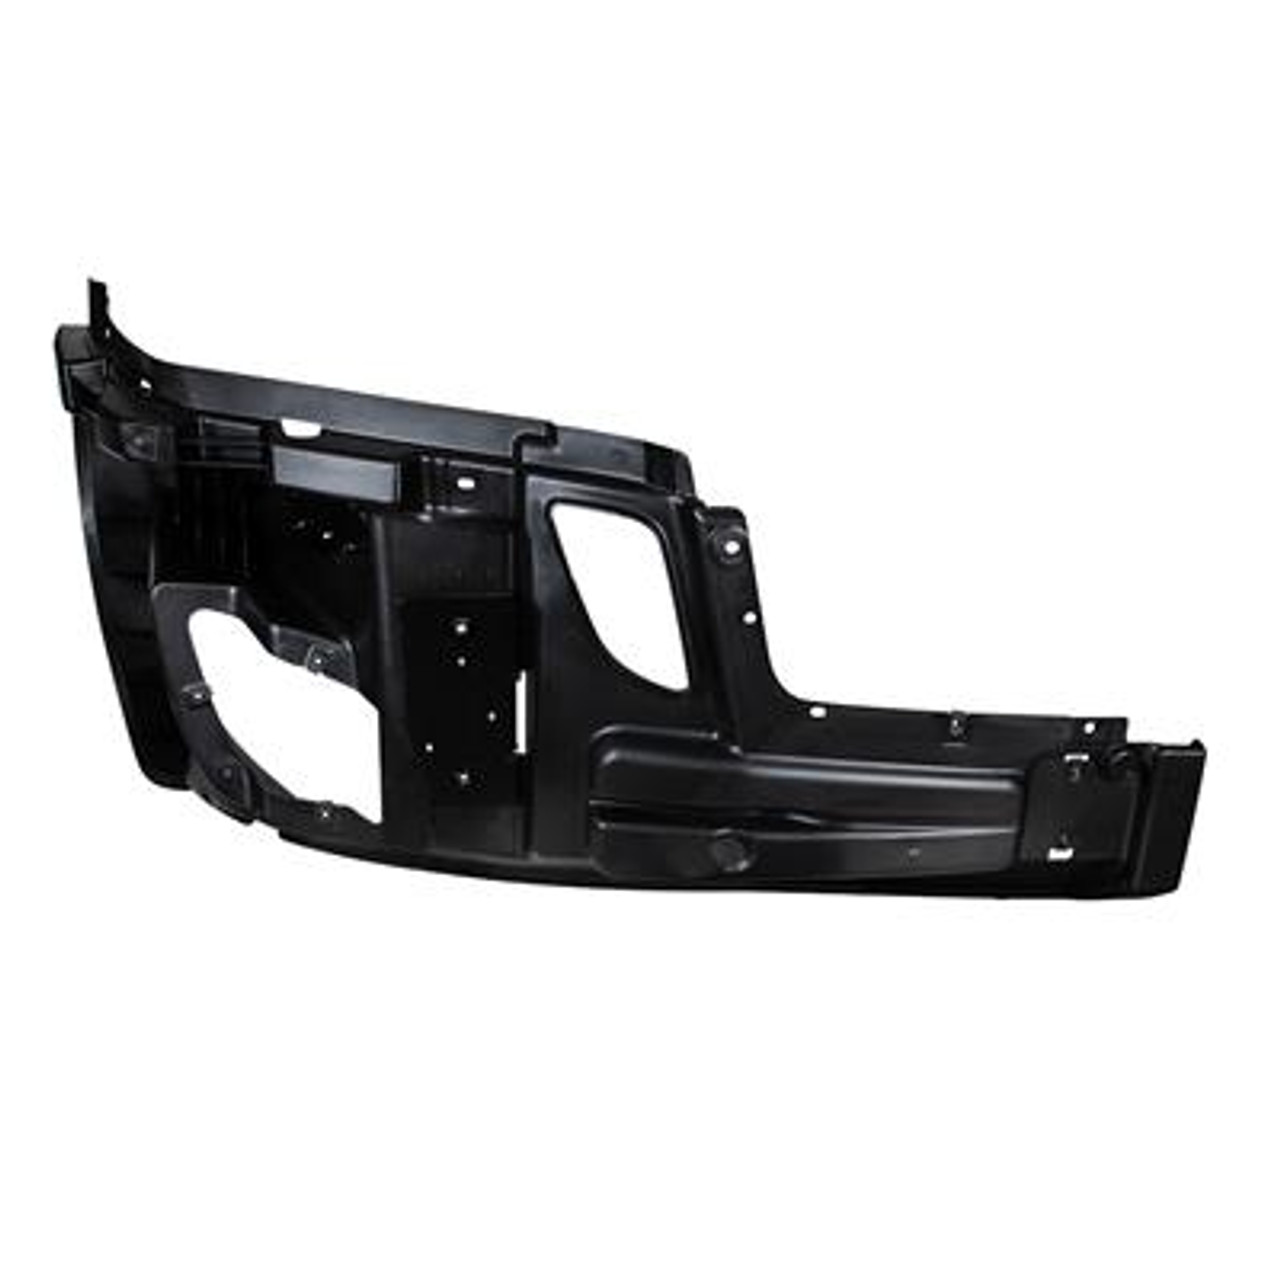 United Pacific carry a selection of various bumpers and accessories for all your trucking needs. From whole bumper assemblies, bumper ends, to bumper support brackets, UP has all the components to make your truck look new and improved.